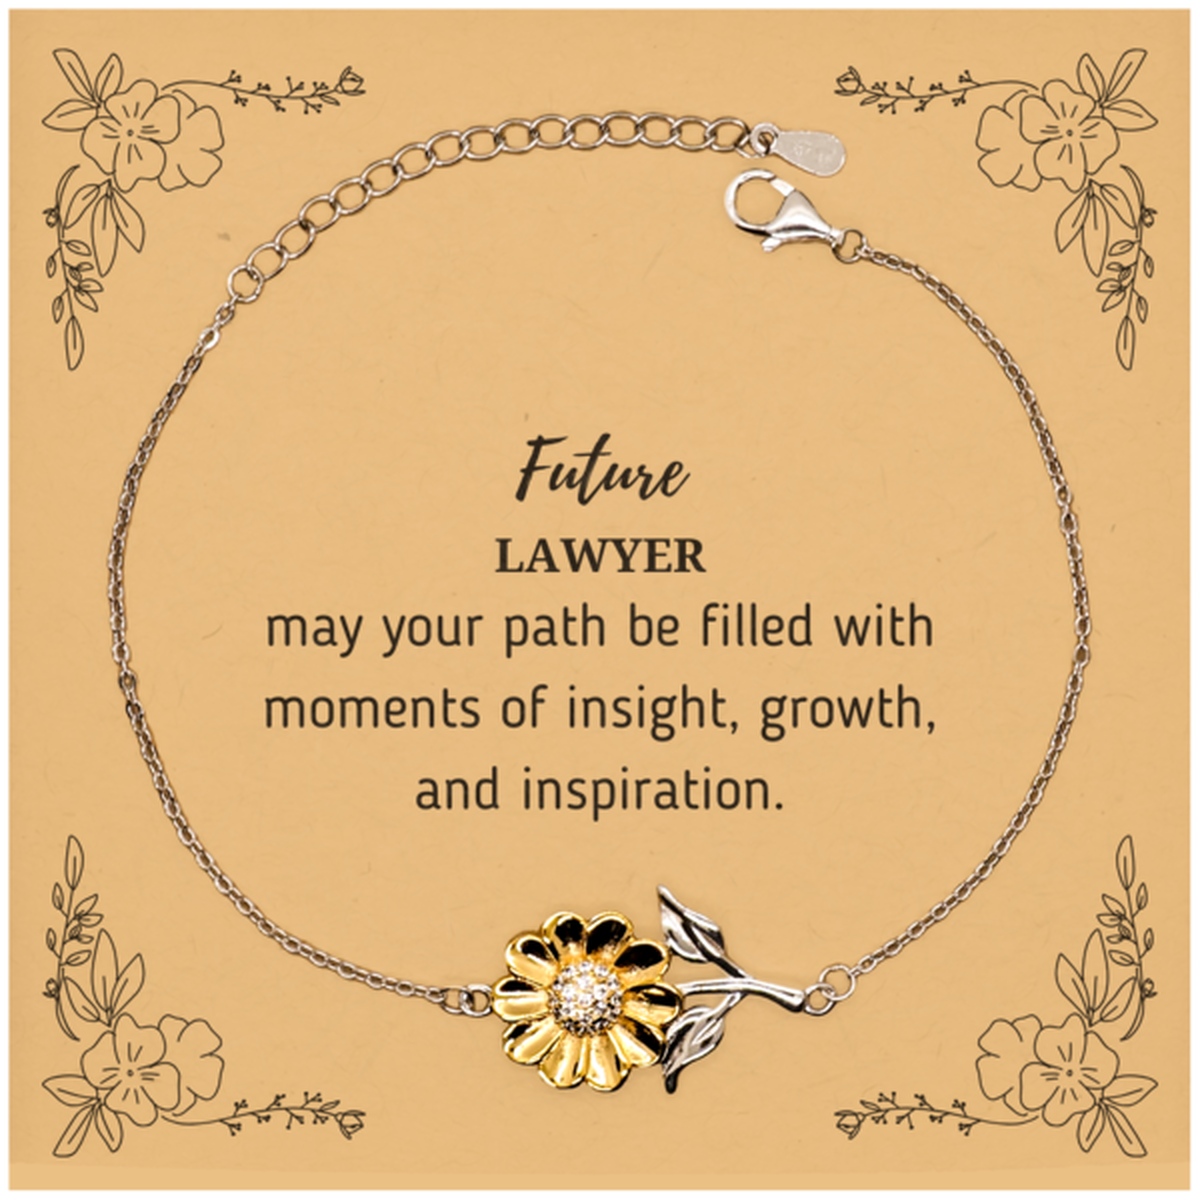 Future Lawyer Gifts, May your path be filled with moments of insight, Graduation Gifts for New Lawyer, Christmas Unique Sunflower Bracelet For Men, Women, Friends